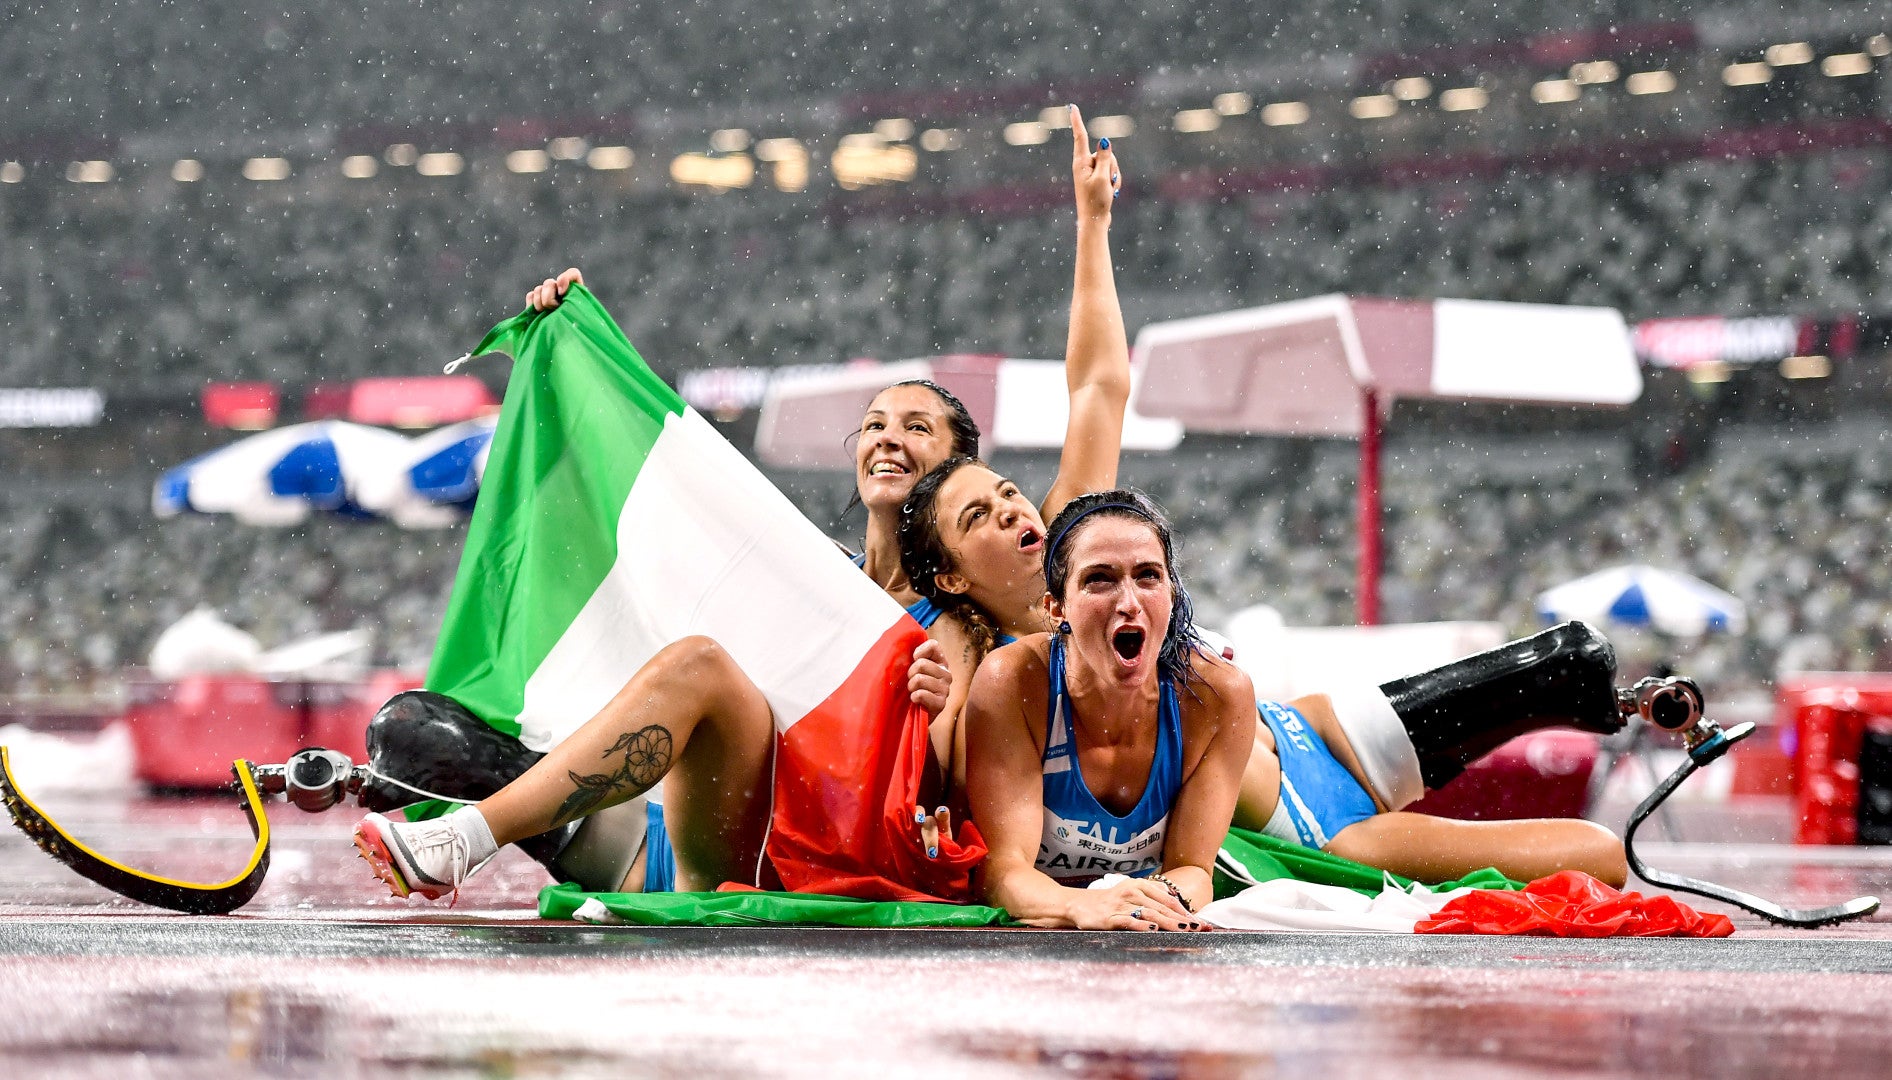 world sports photography awards track and field italy